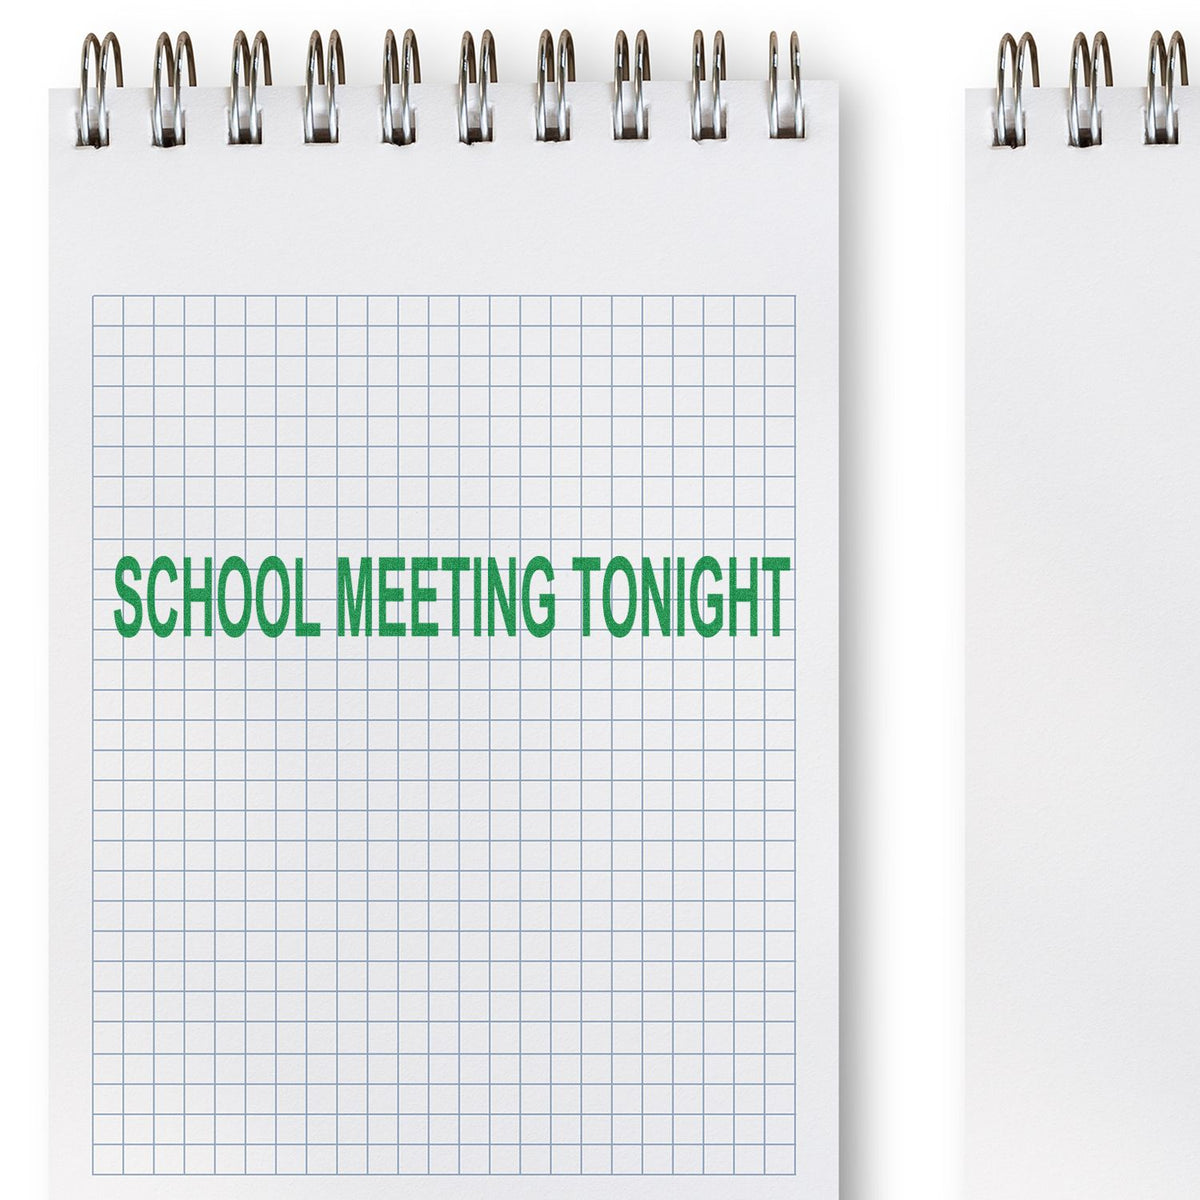 Large Self-Inking School Meeting Tonight Stamp In Use